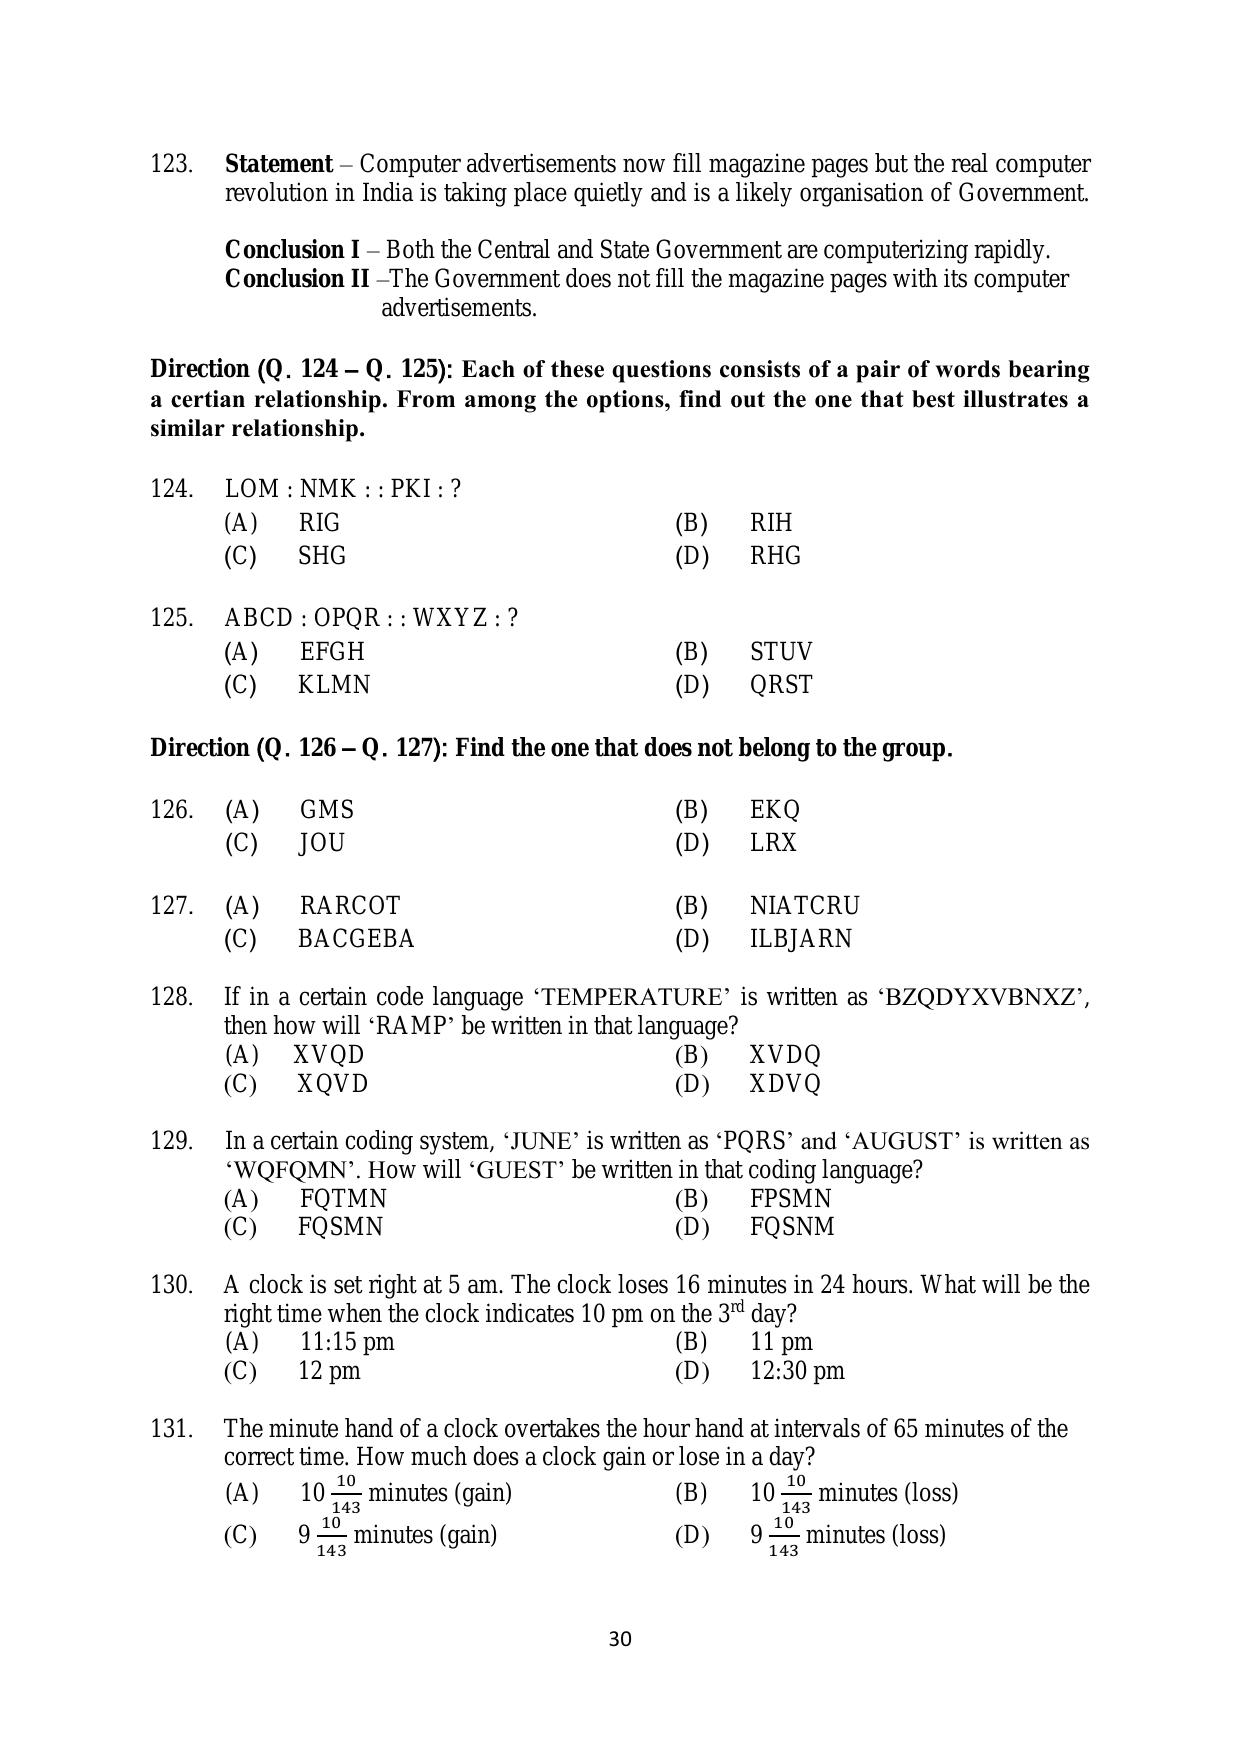 AILET 2020 Question Paper for BA LLB - Page 30